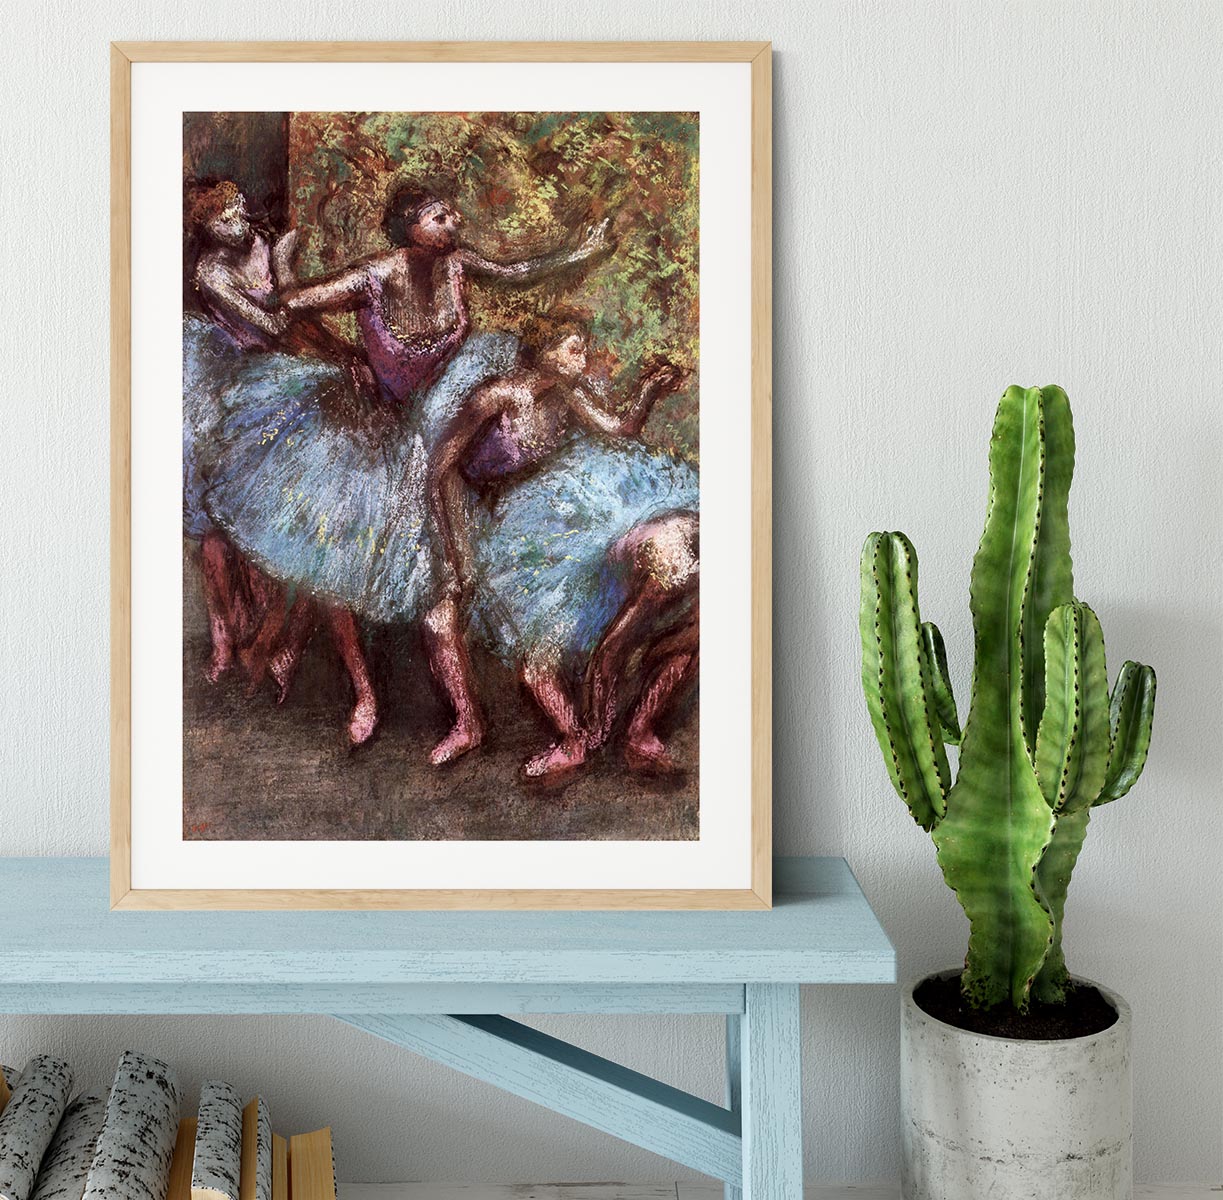 Four dancers behind the scenes 1 by Degas Framed Print - Canvas Art Rocks - 3